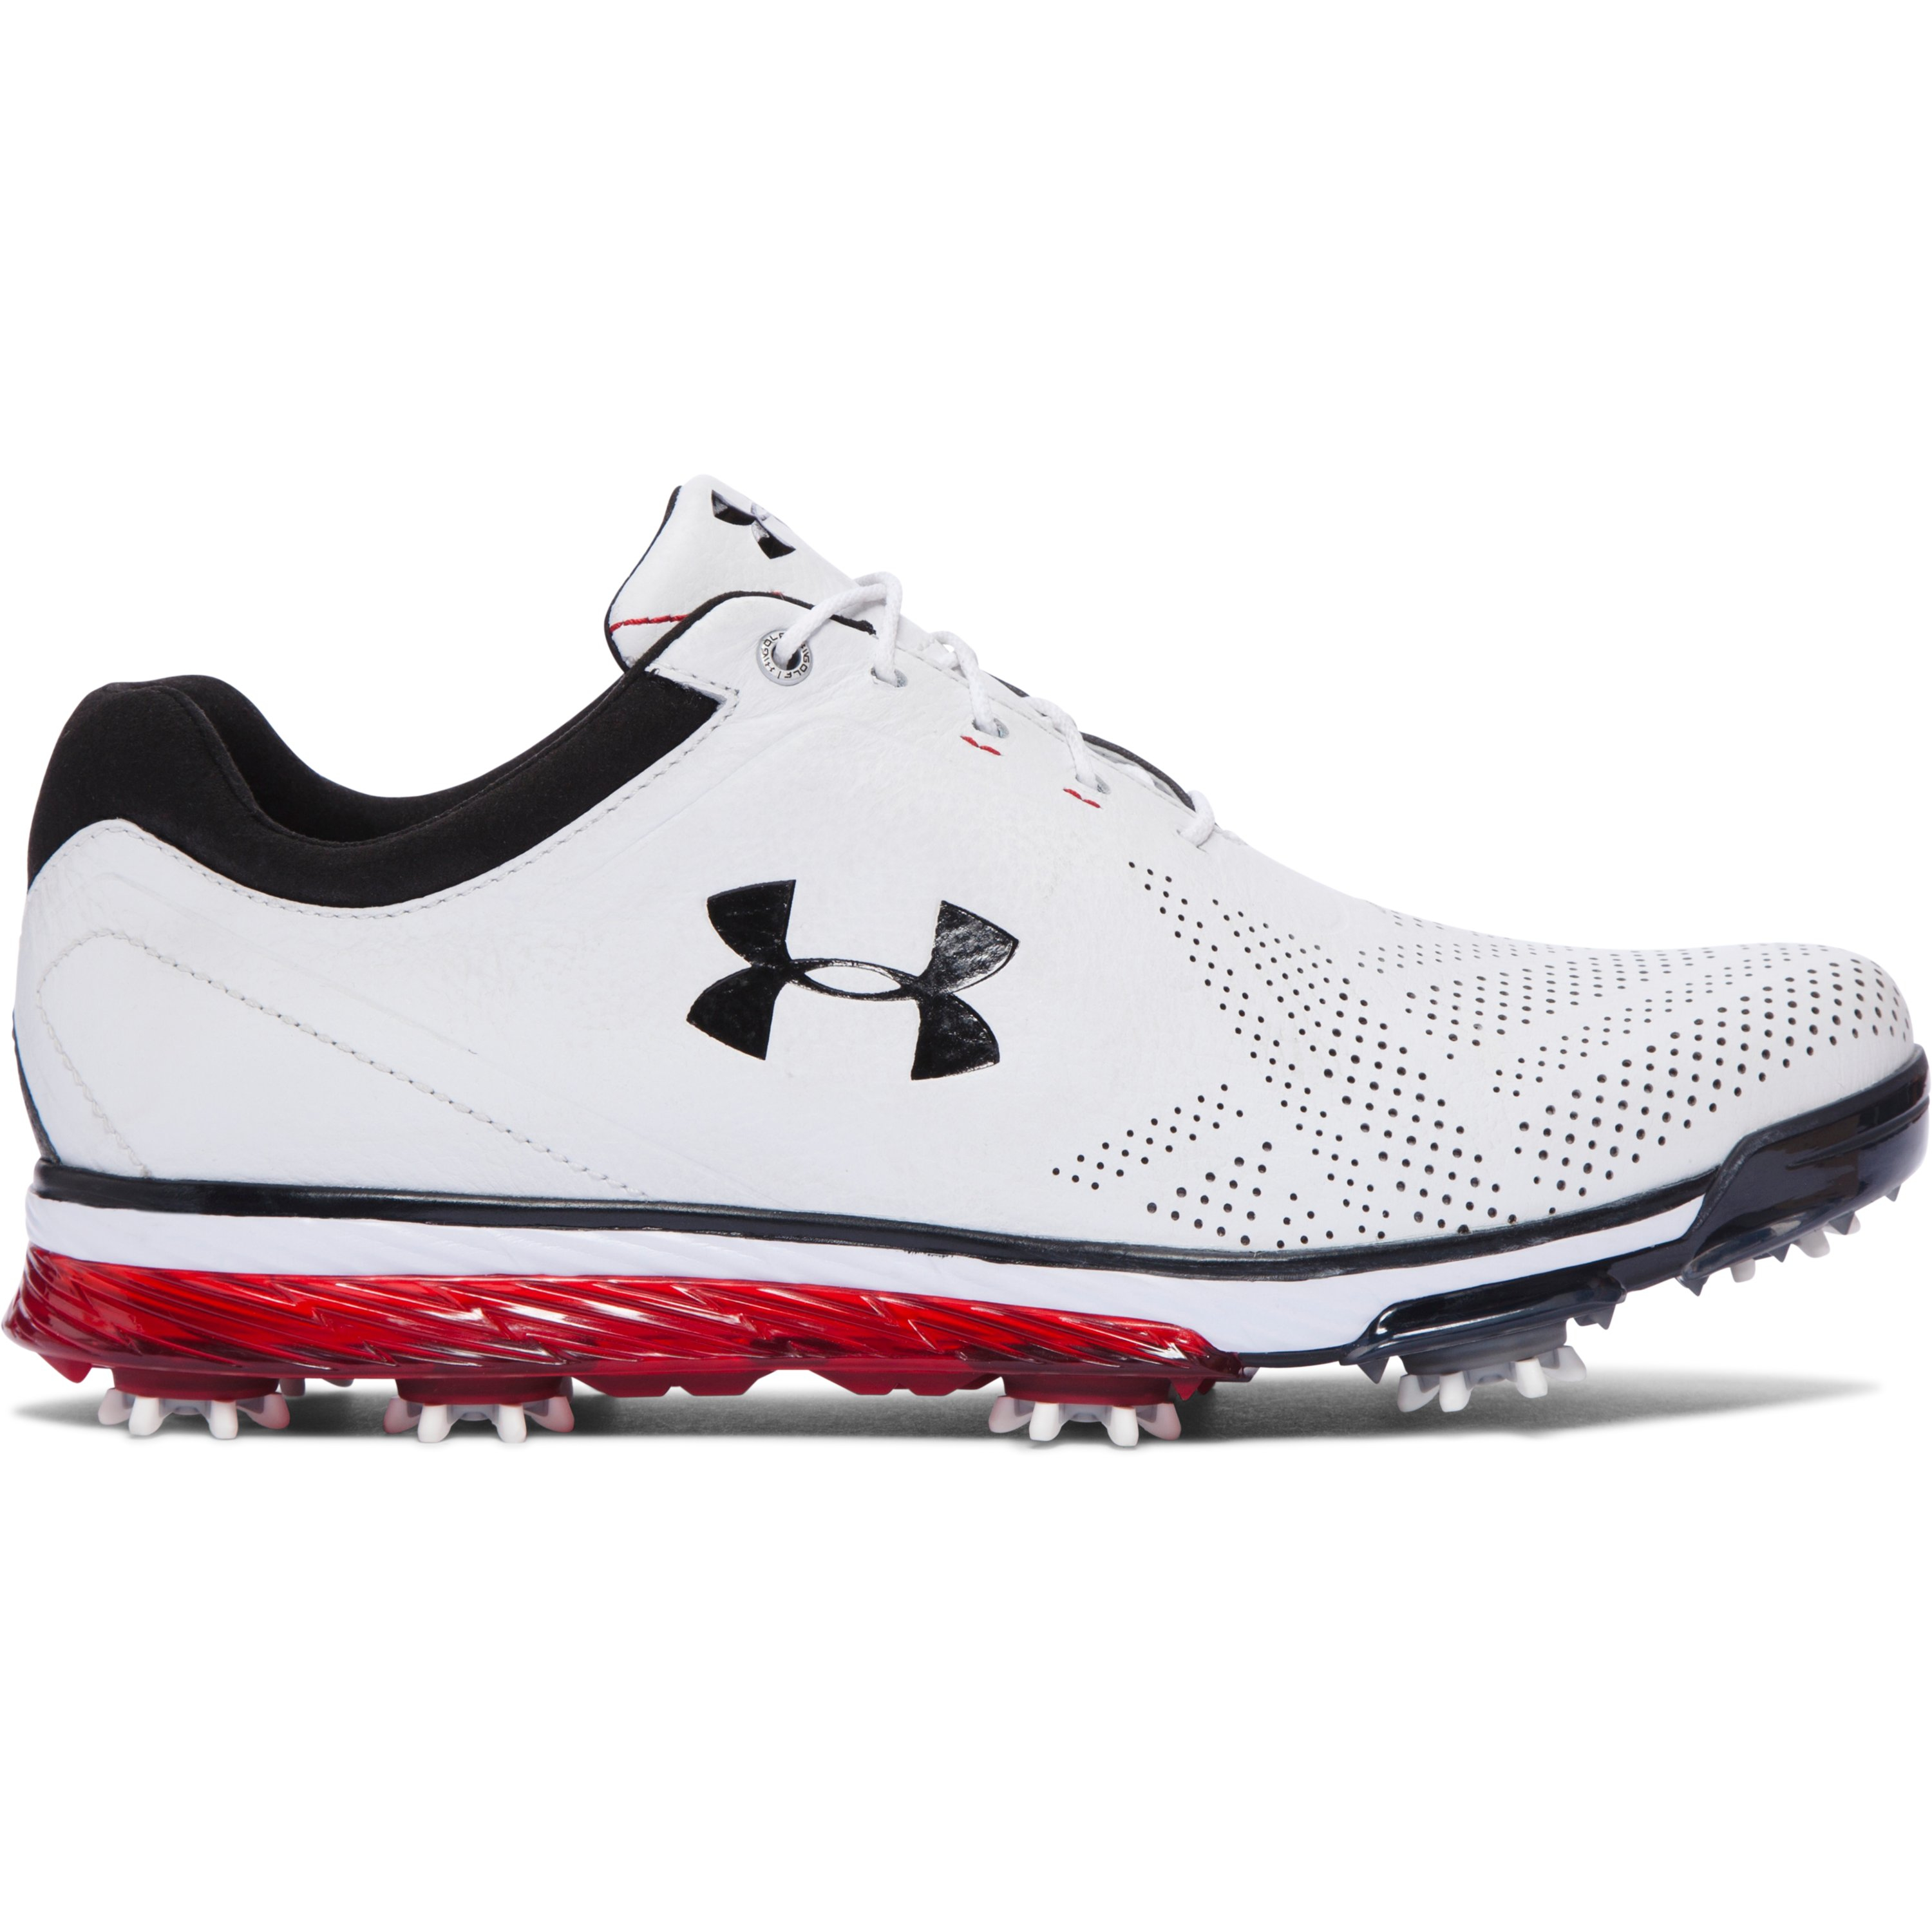 Under Armour Leather Men's Ua Tempo Tour Golf Shoes in White/Black ...